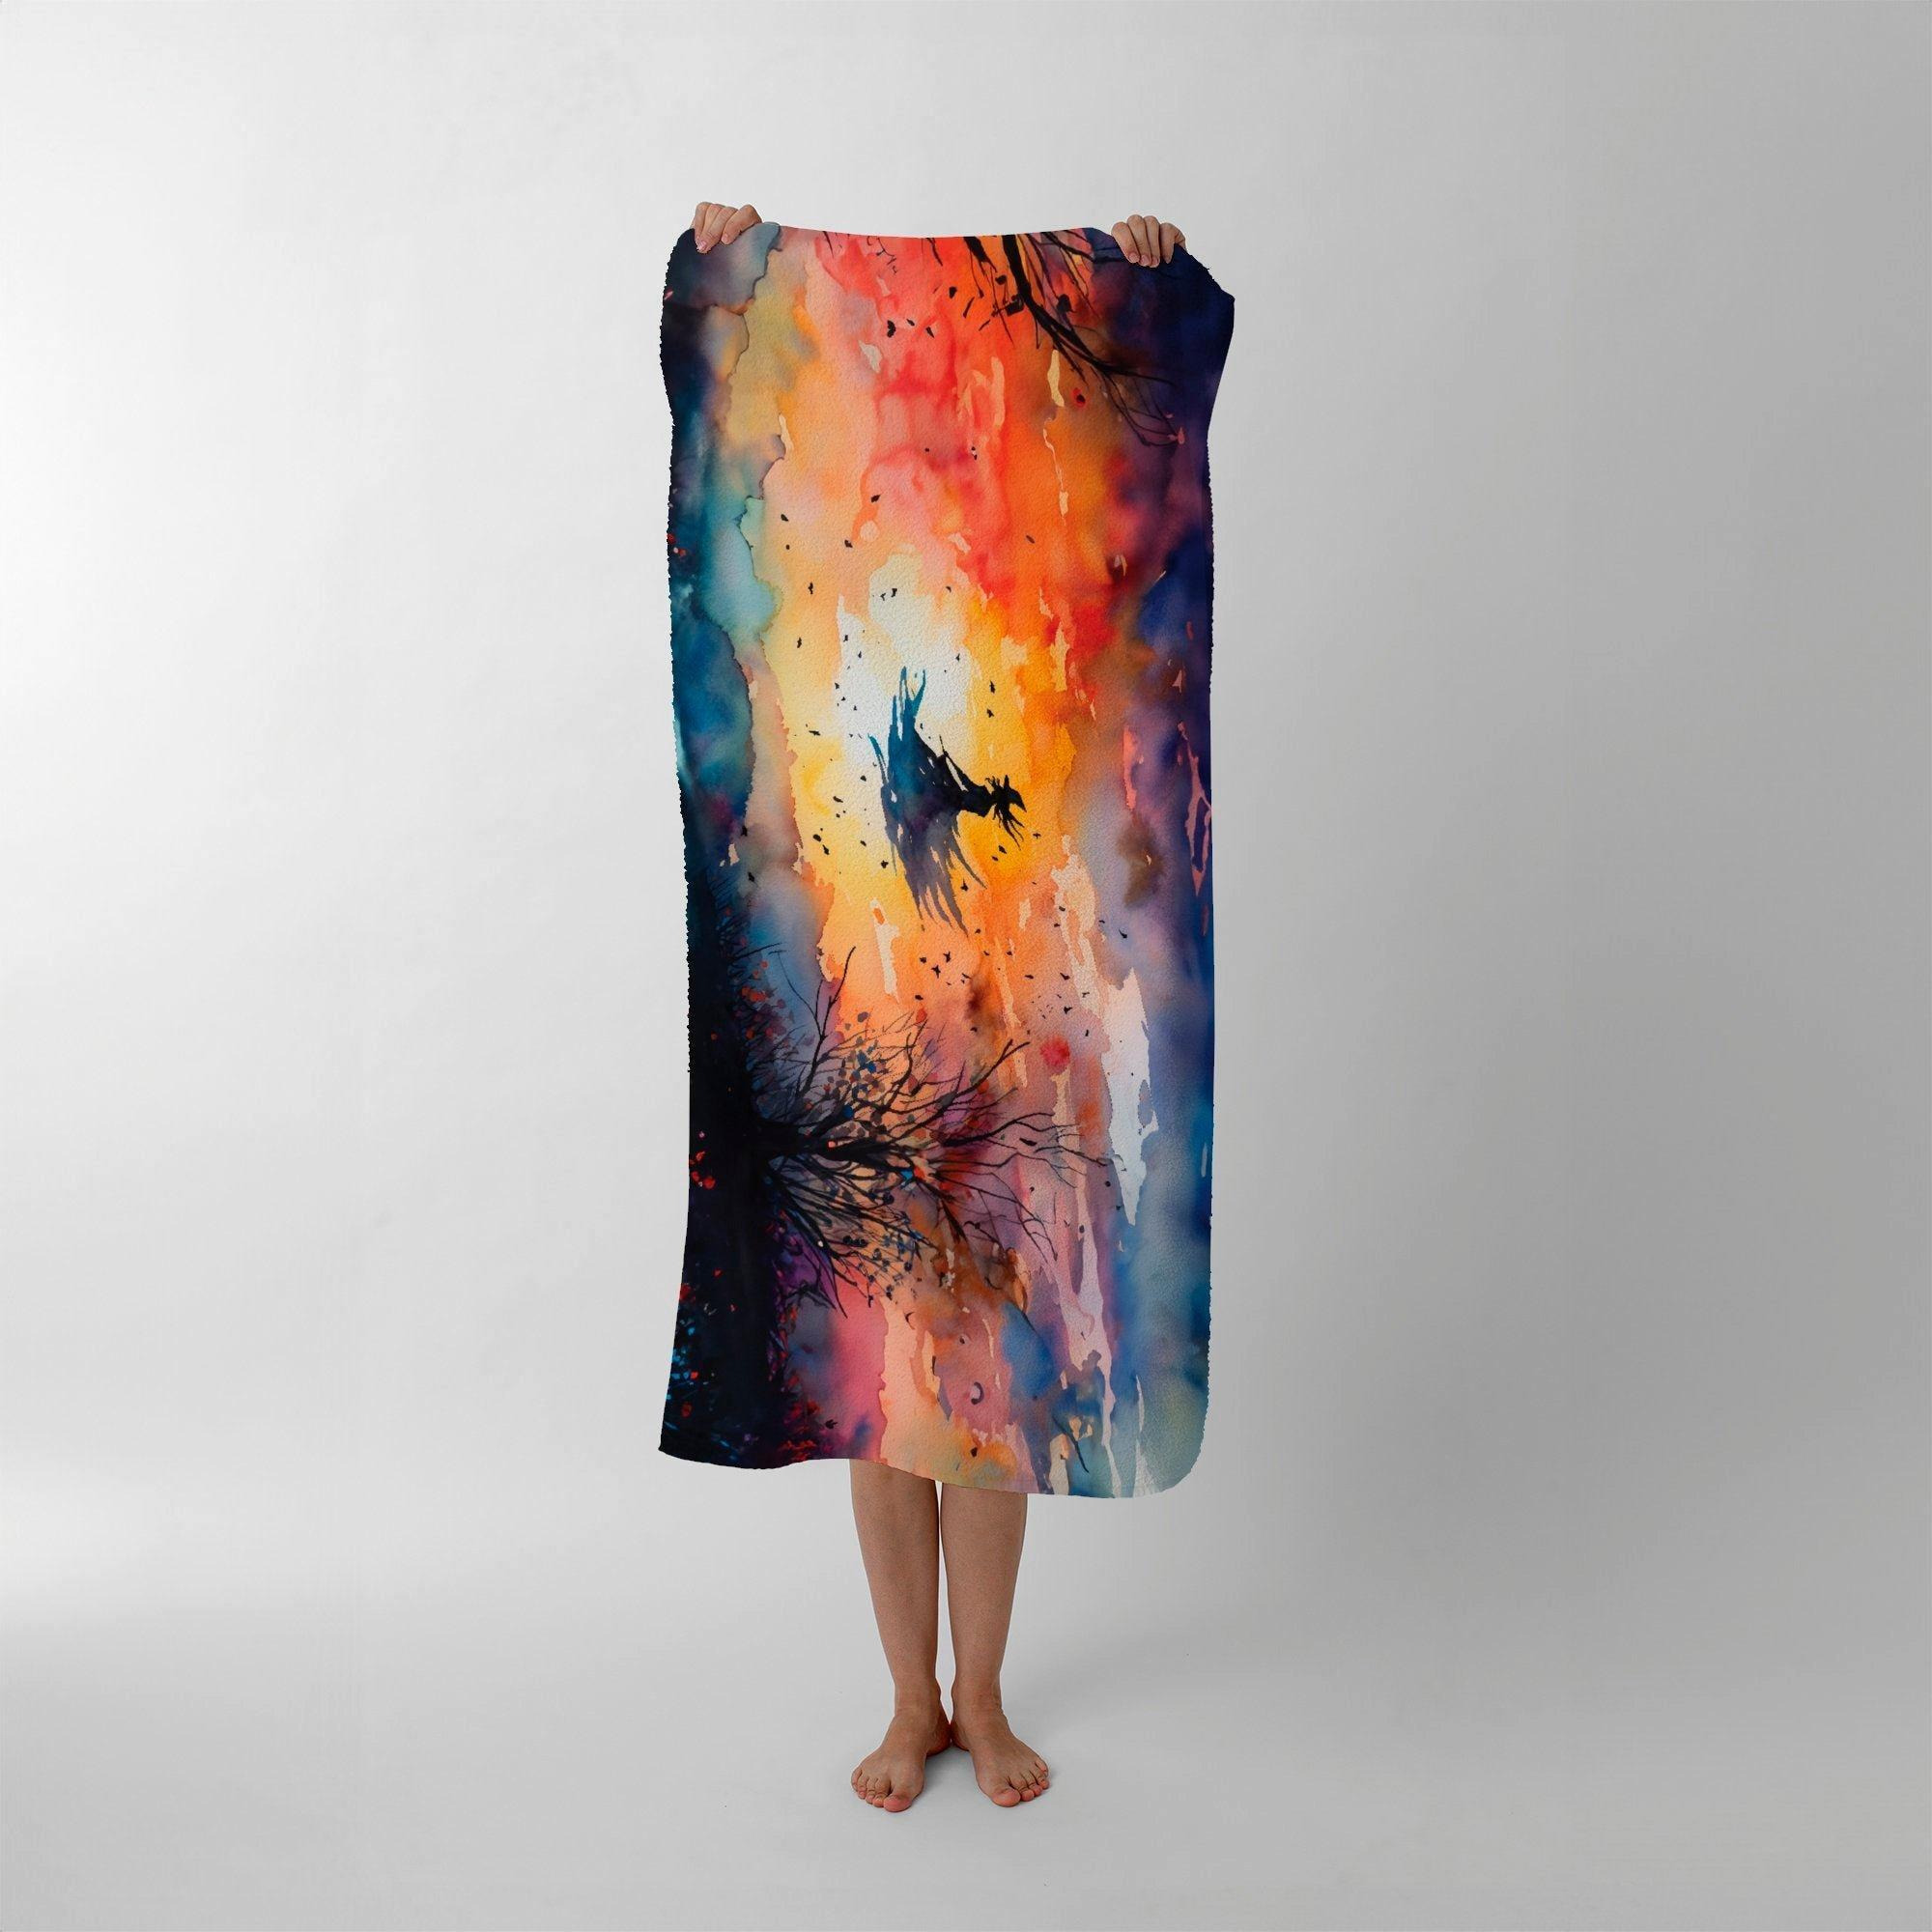 A Mesmerizing Watercolor Artwork Featuring A Graceful Witch Beach Towel - image 1